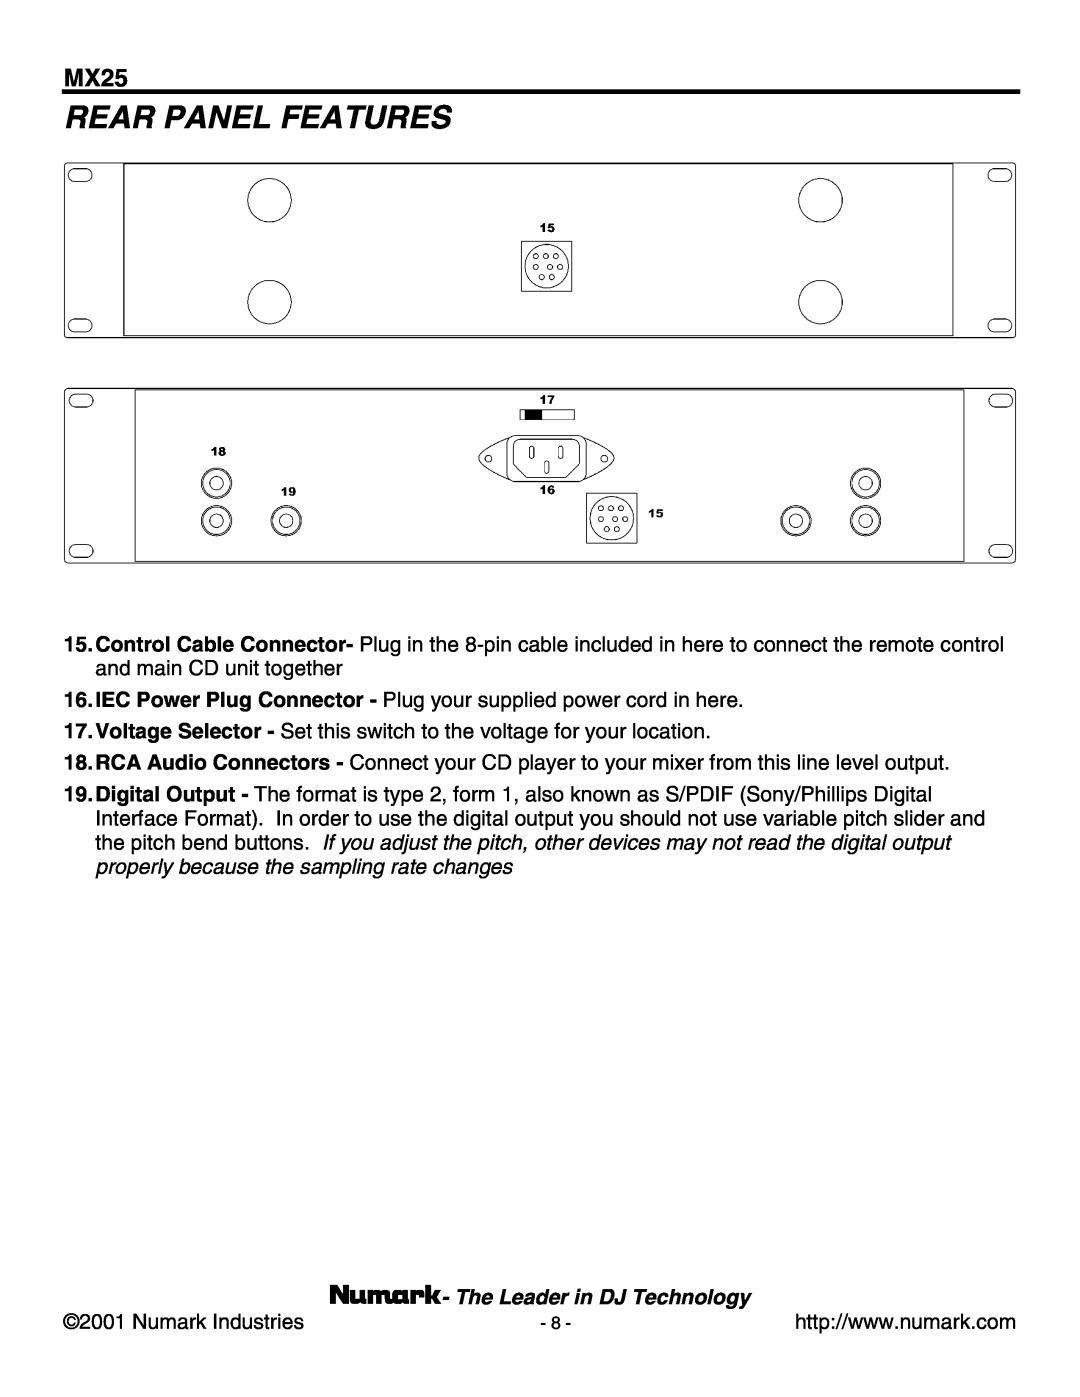 Numark Industries MX25 manual Rear Panel Features, The Leader in DJ Technology 